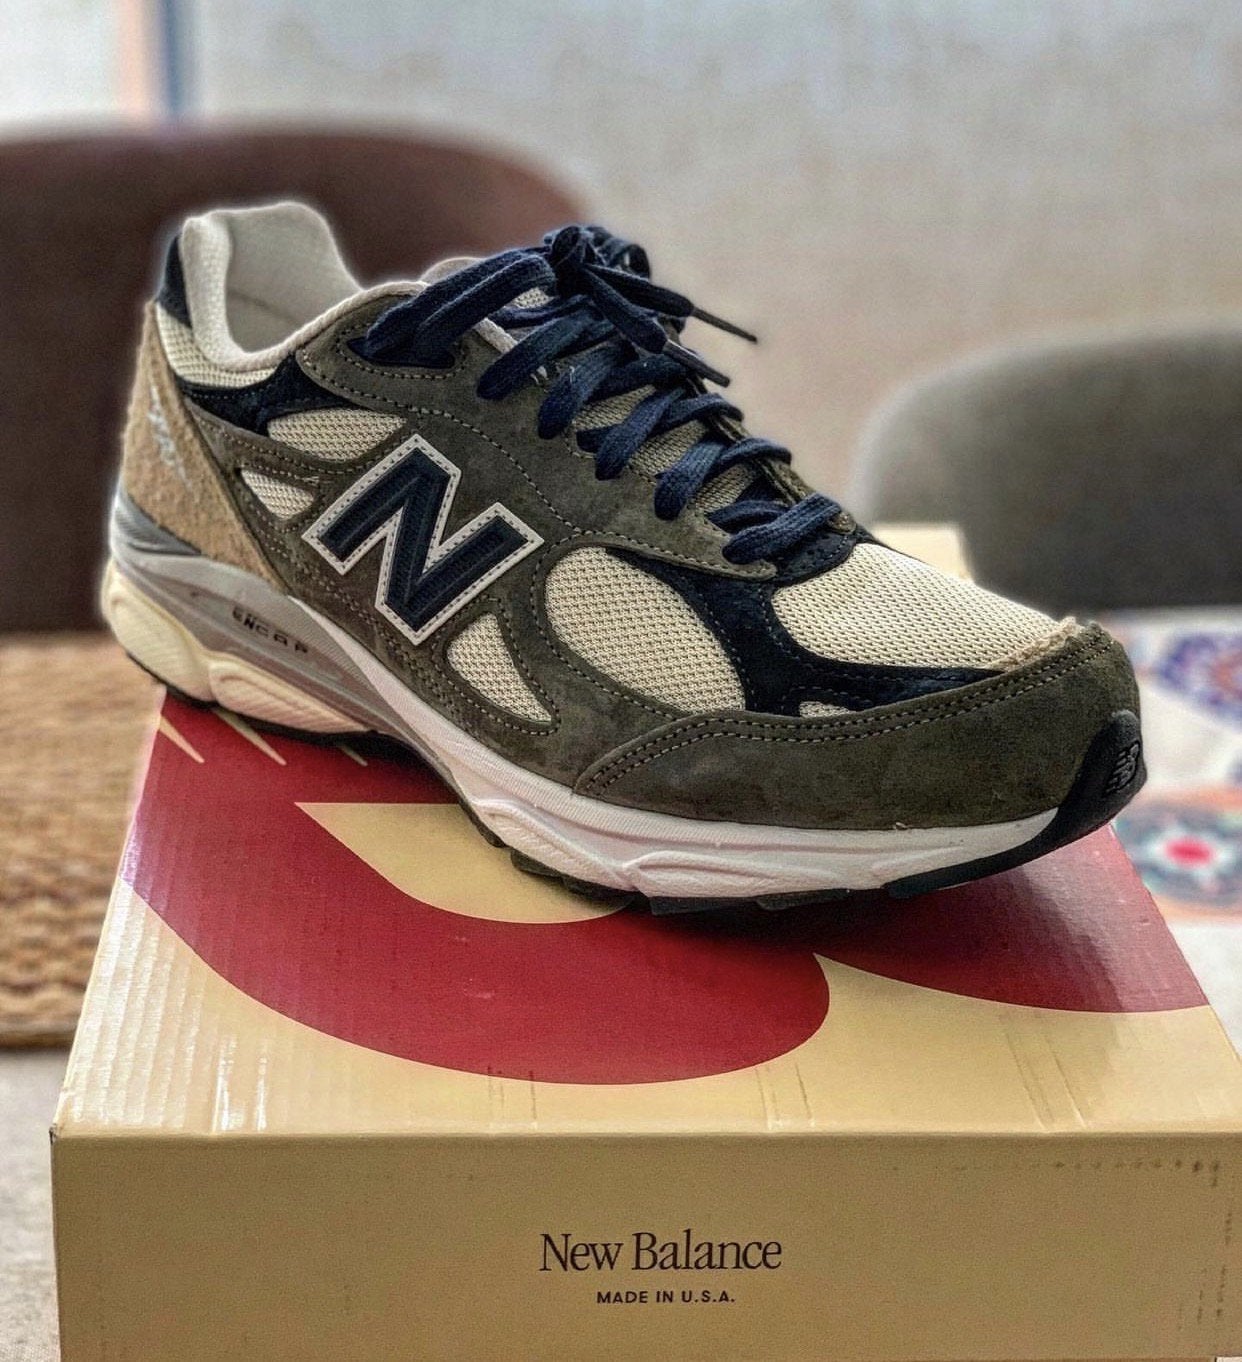 New Balance 990v3 Made in USA Olive M990TO3 Release Date + Where to Buy ...